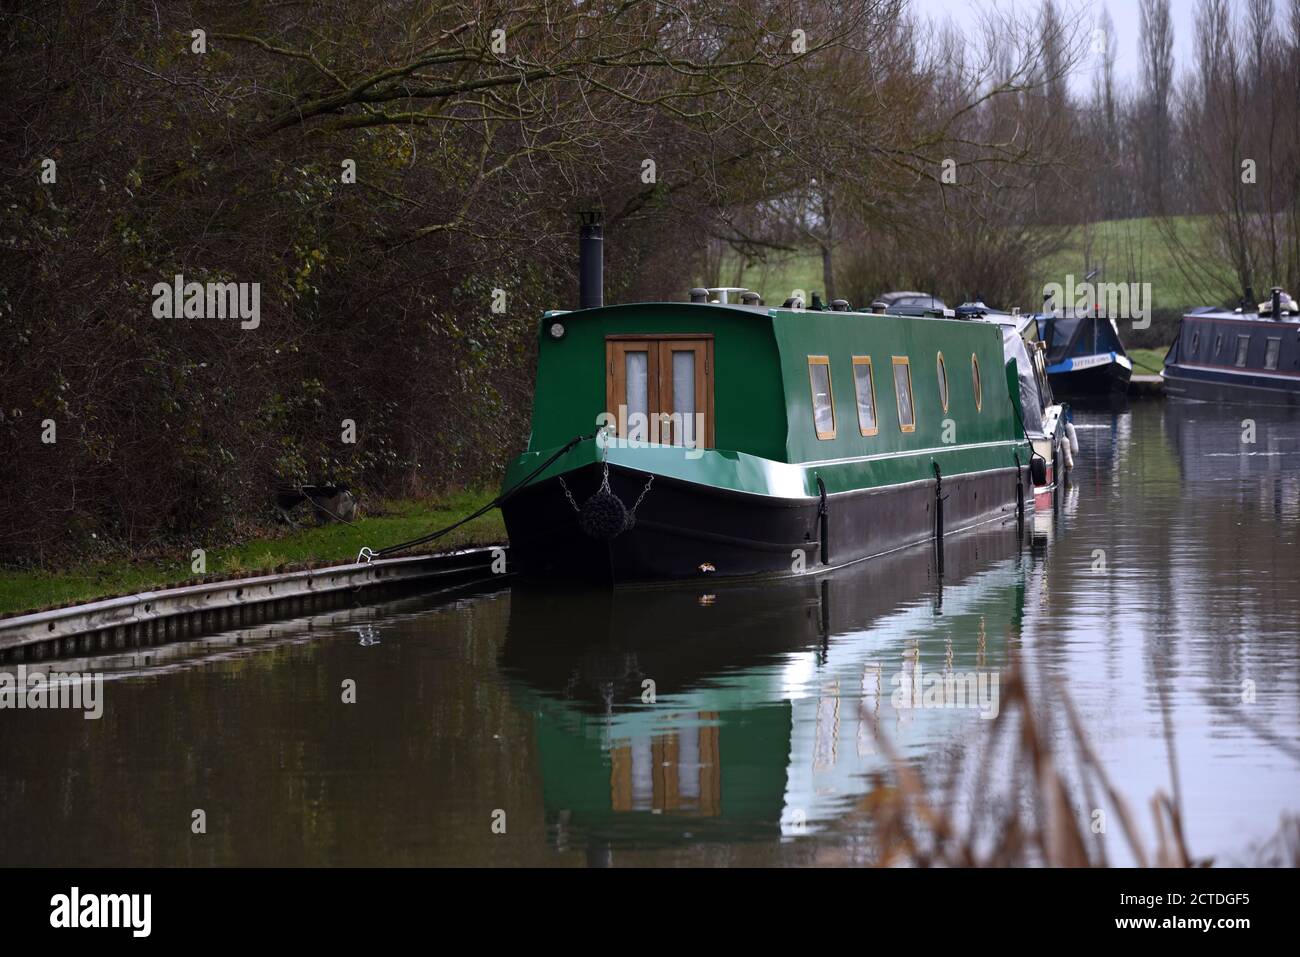 A green canal boat is reflected in still water in this photo taken along the Grand Union canal in Buckinghamshire Stock Photo